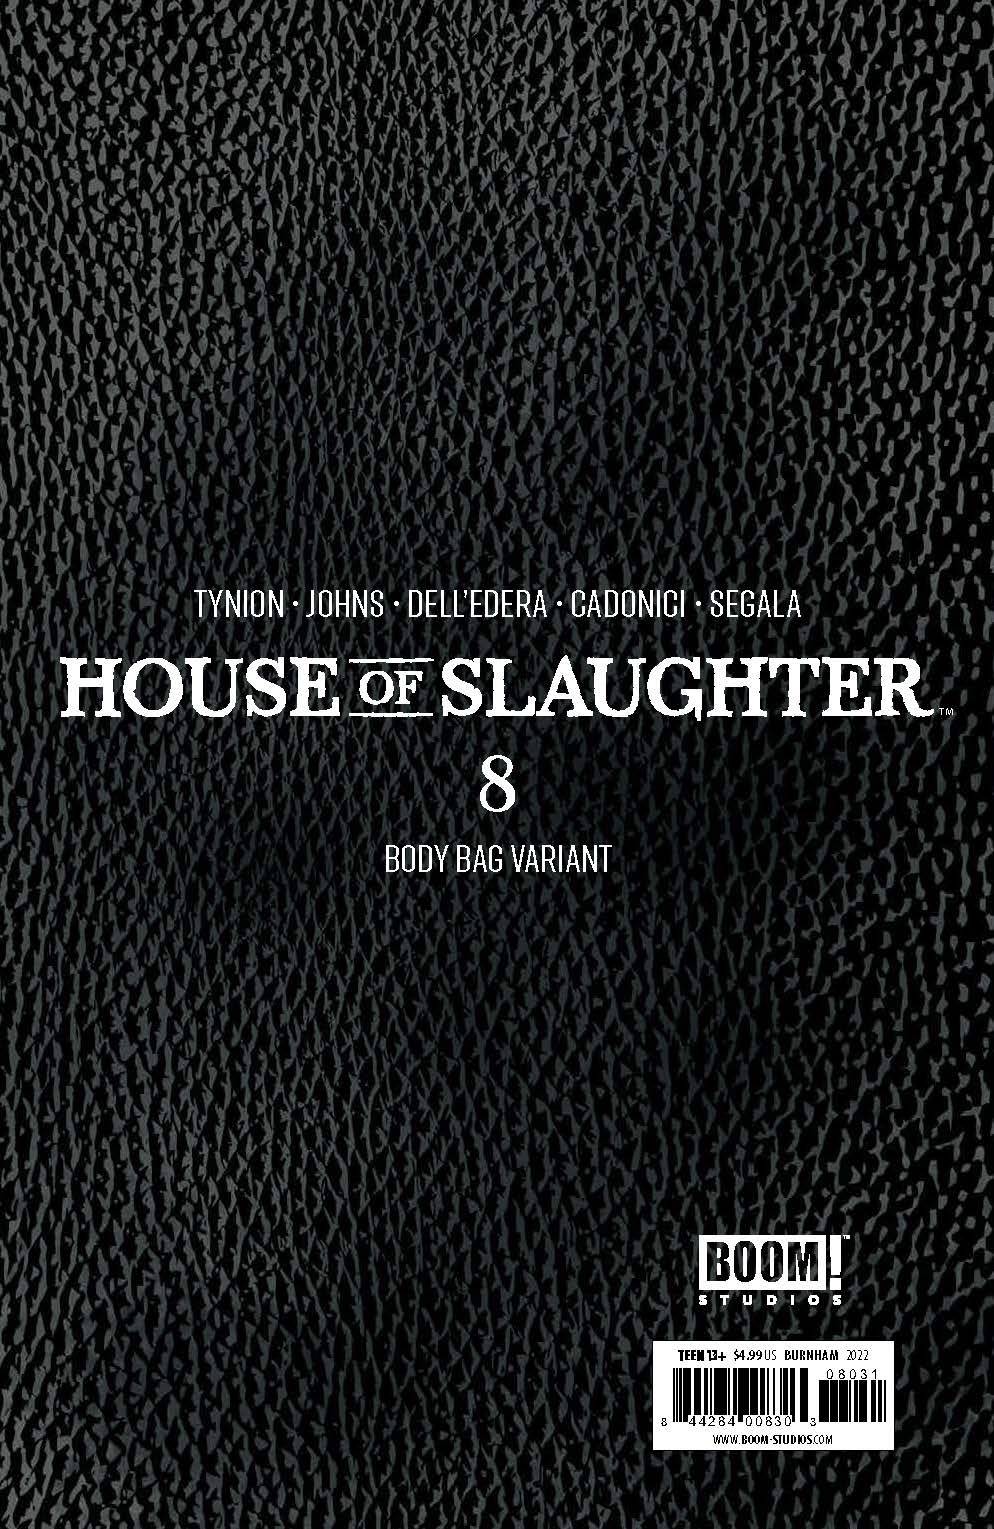 HOUSE OF SLAUGHTER #8